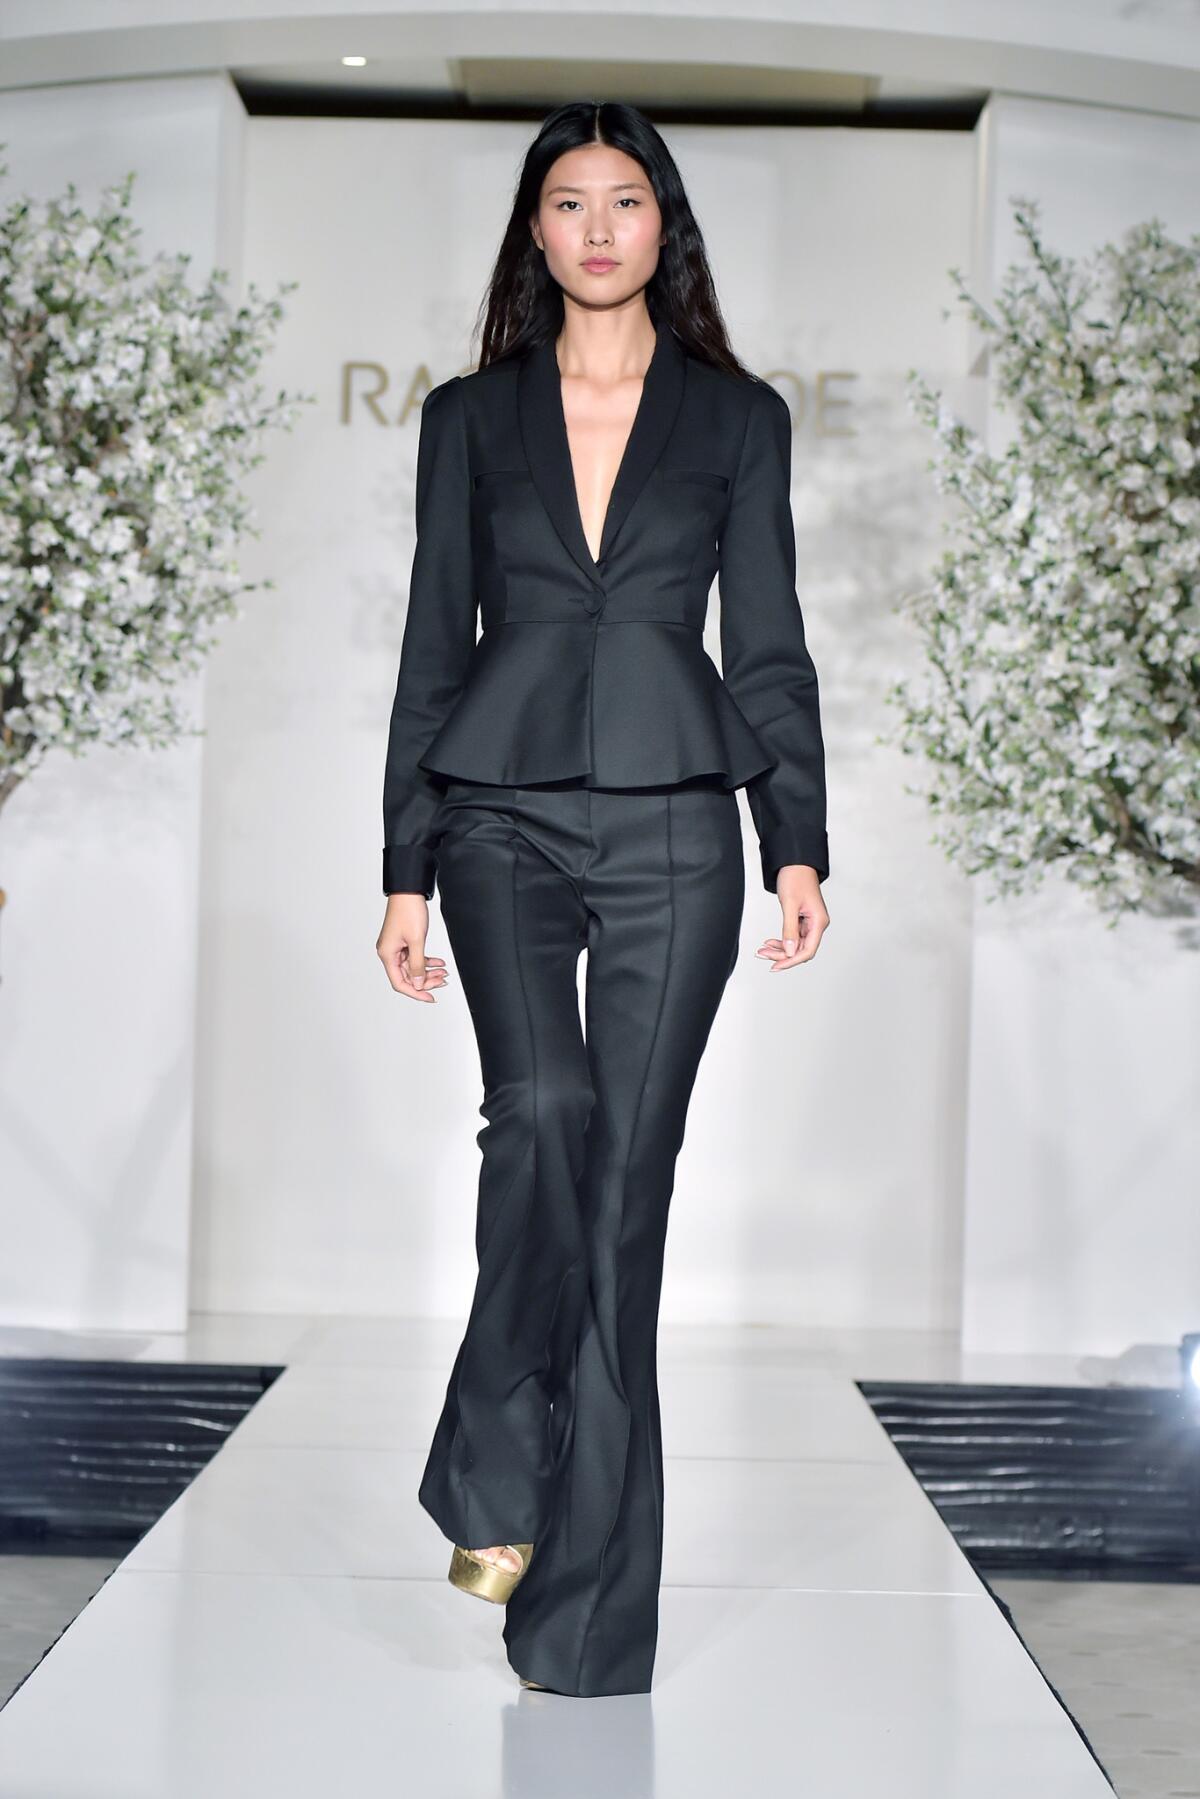 One runway look from Zoe's spring 2019 collection was a suit with dramatic flares.